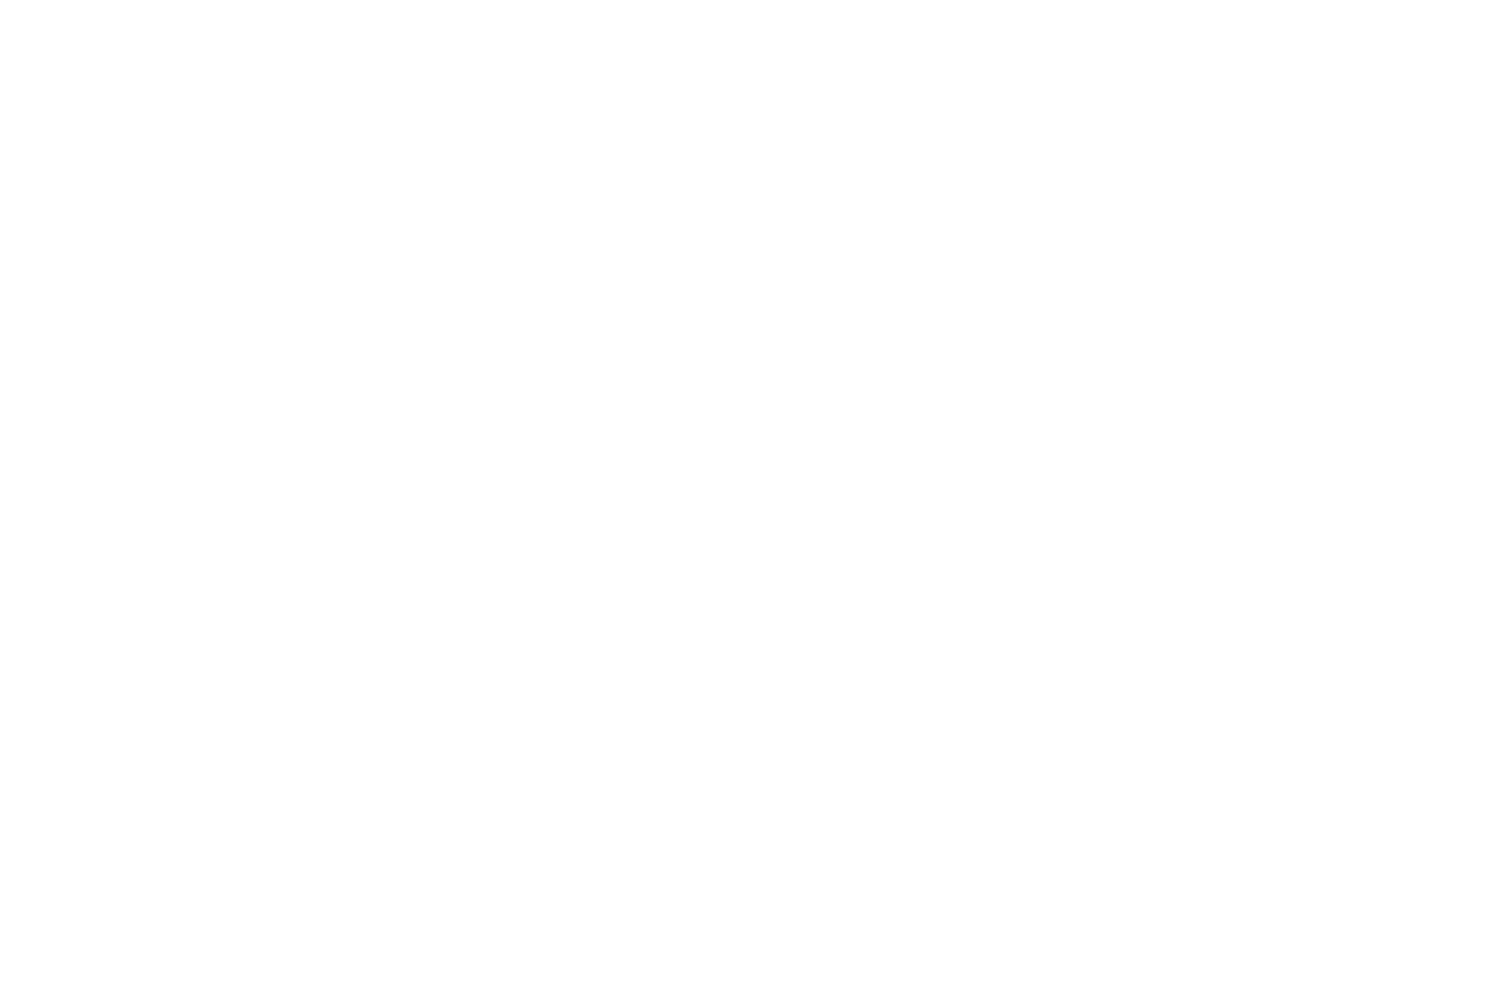 Great Commission Coffee